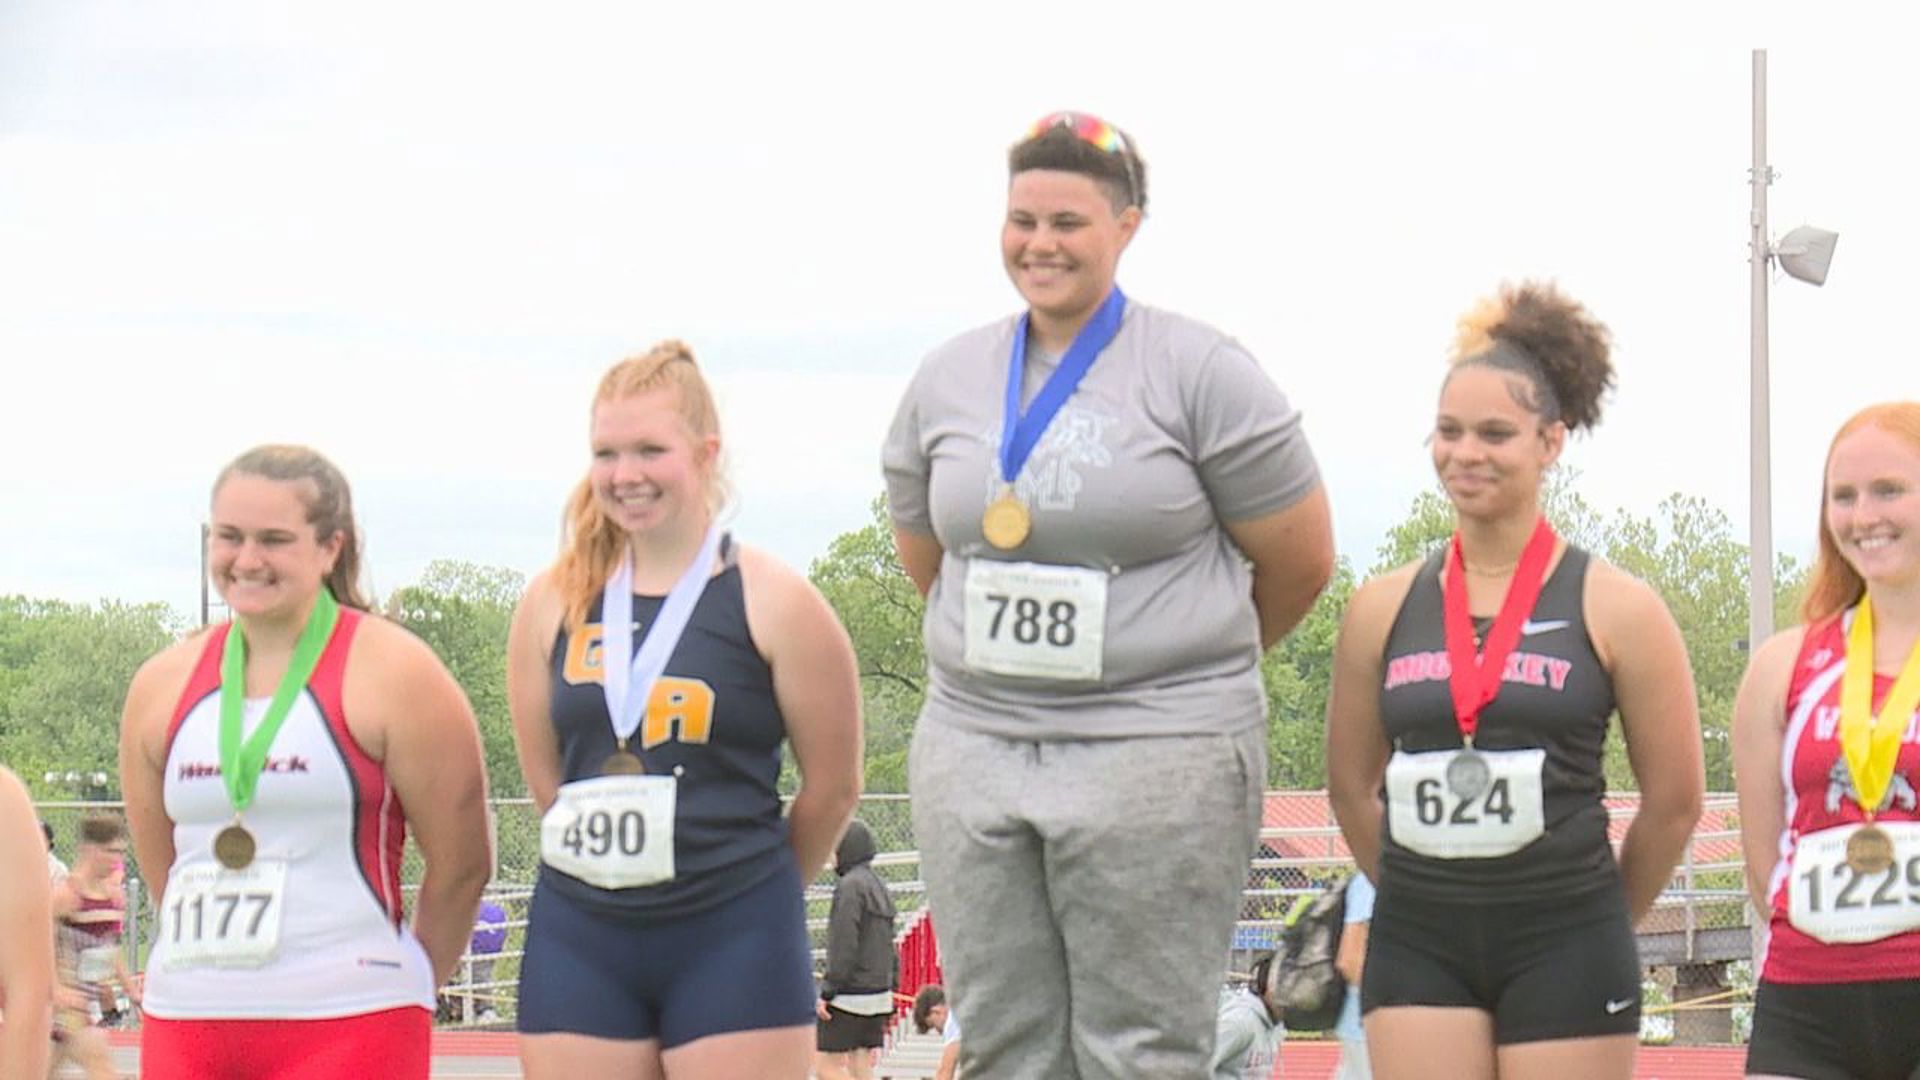 9 out of 14 gold medalists at PIAA District III Championship field events were from central Pennsylvania schools.